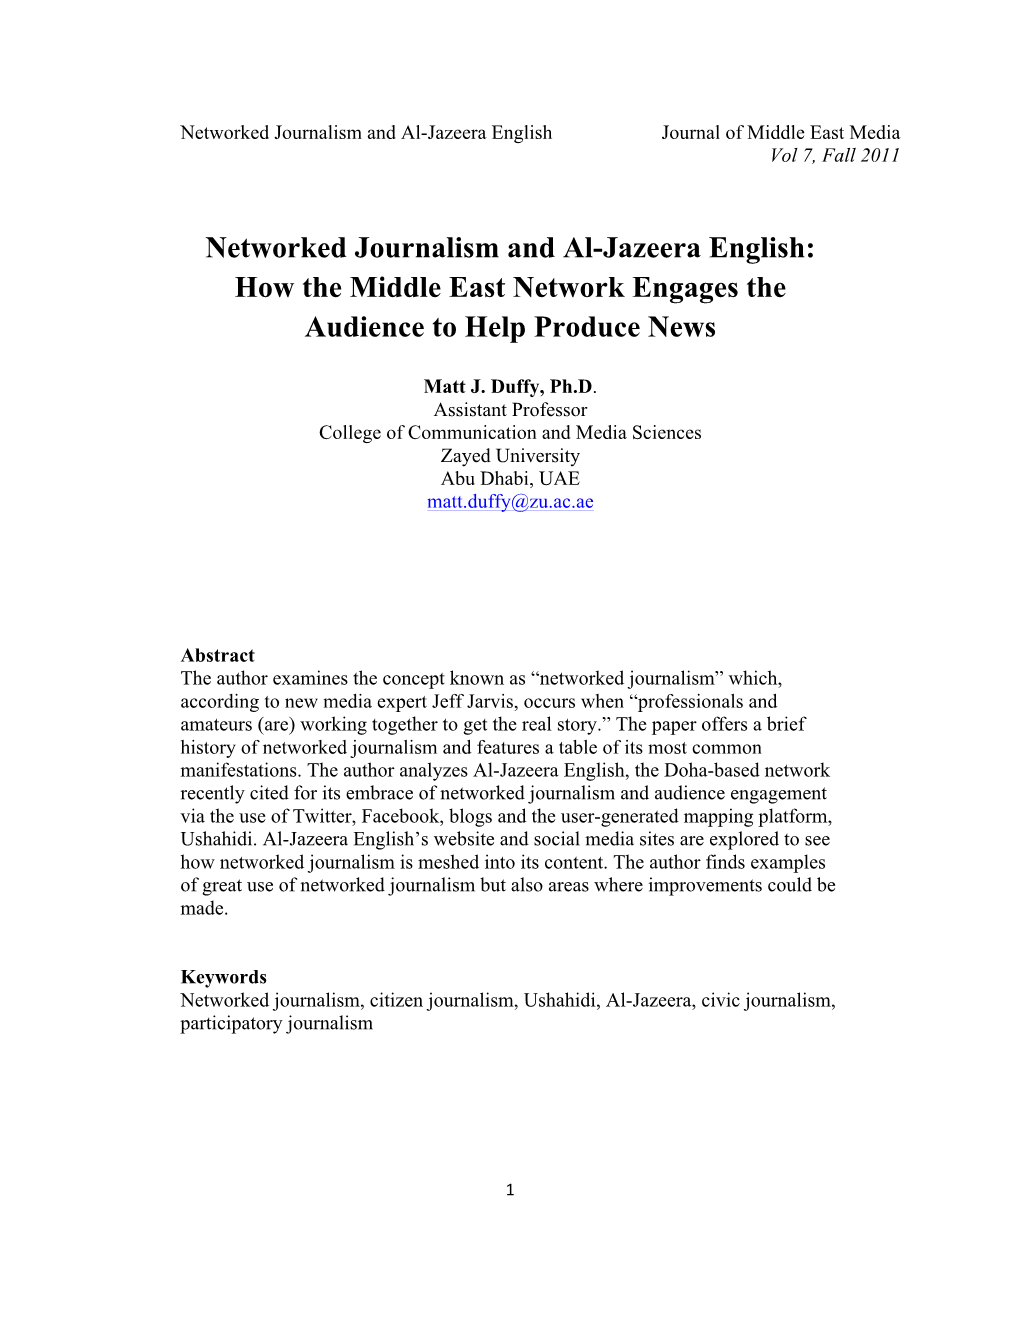 Networked Journalism and Al-Jazeera English Journal of Middle East Media Vol 7, Fall 2011